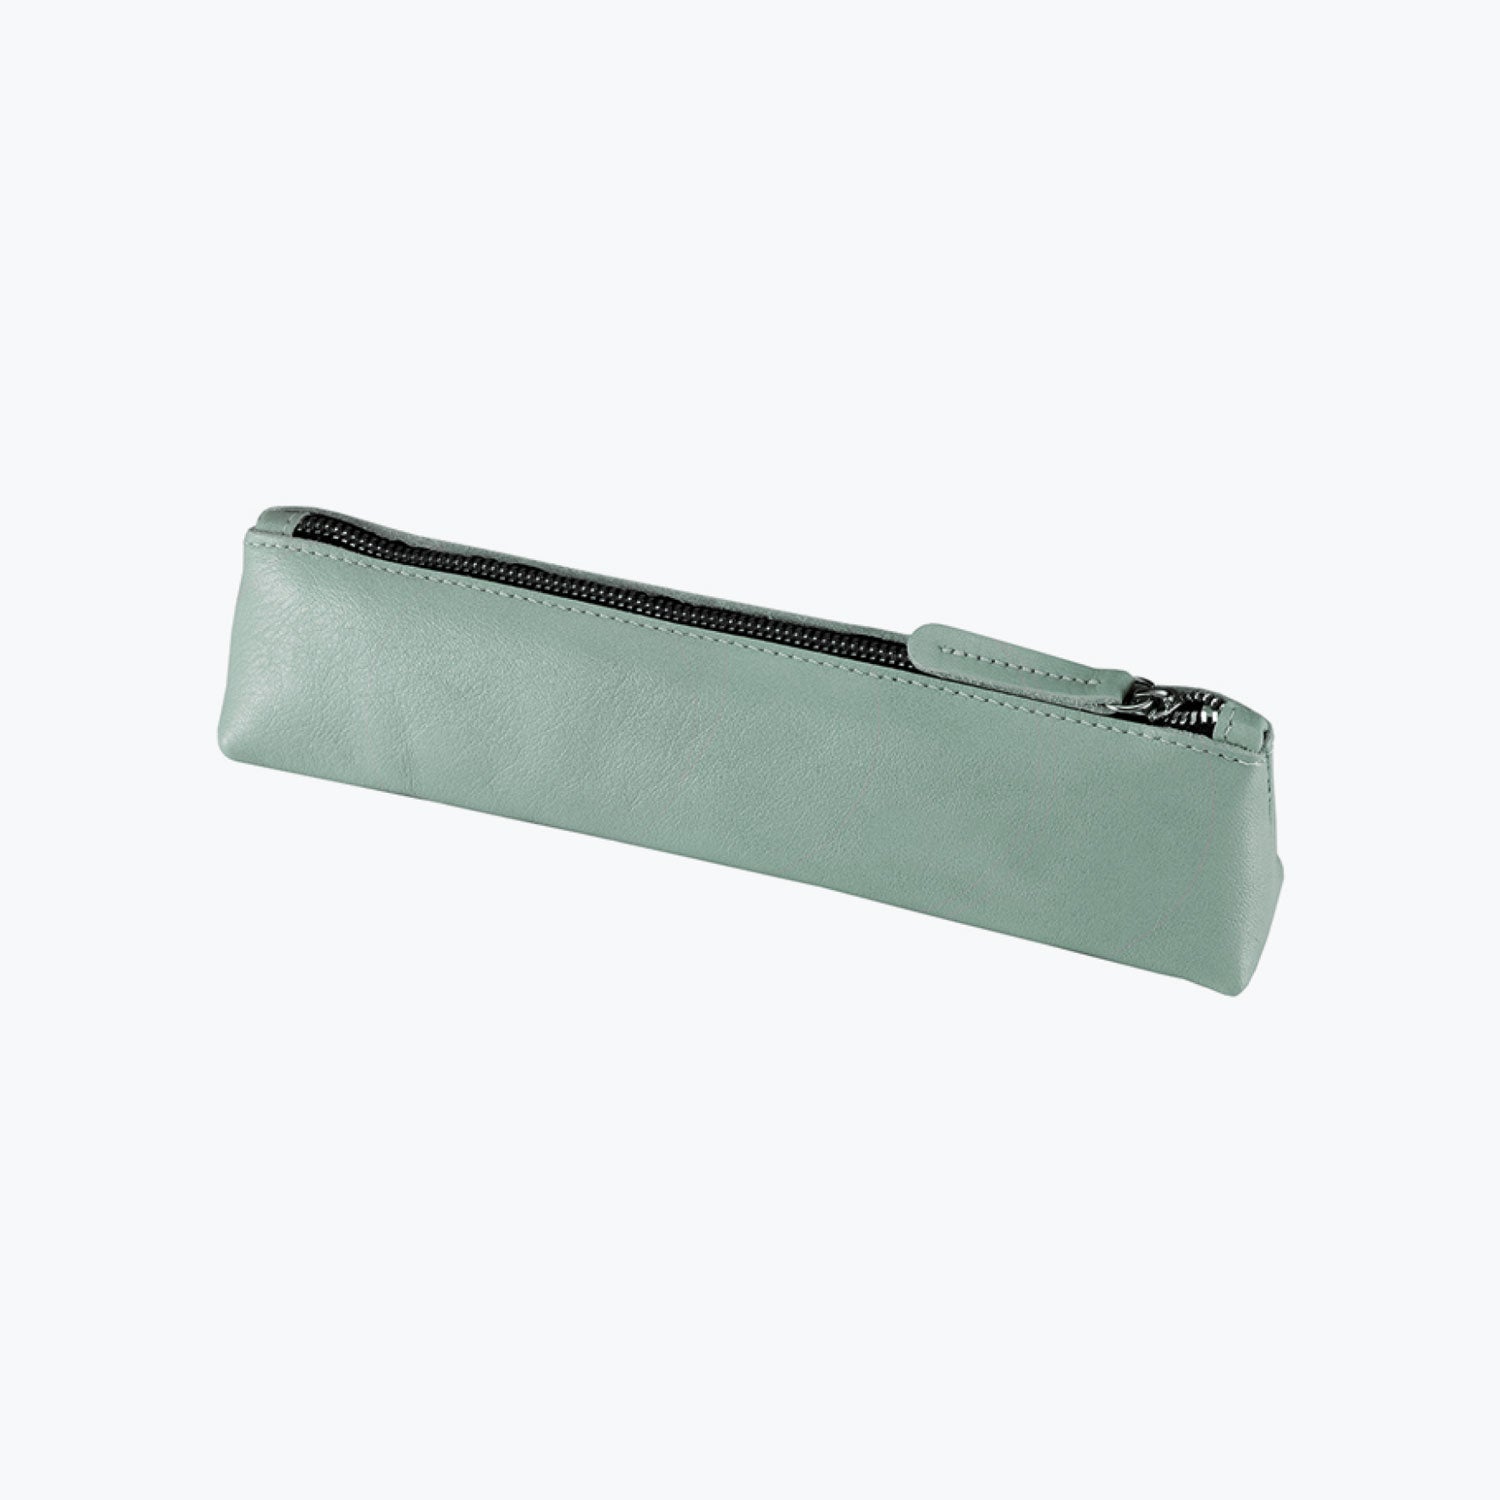 Bookbinders Design - Pencil Case - Leather - Dusty Green